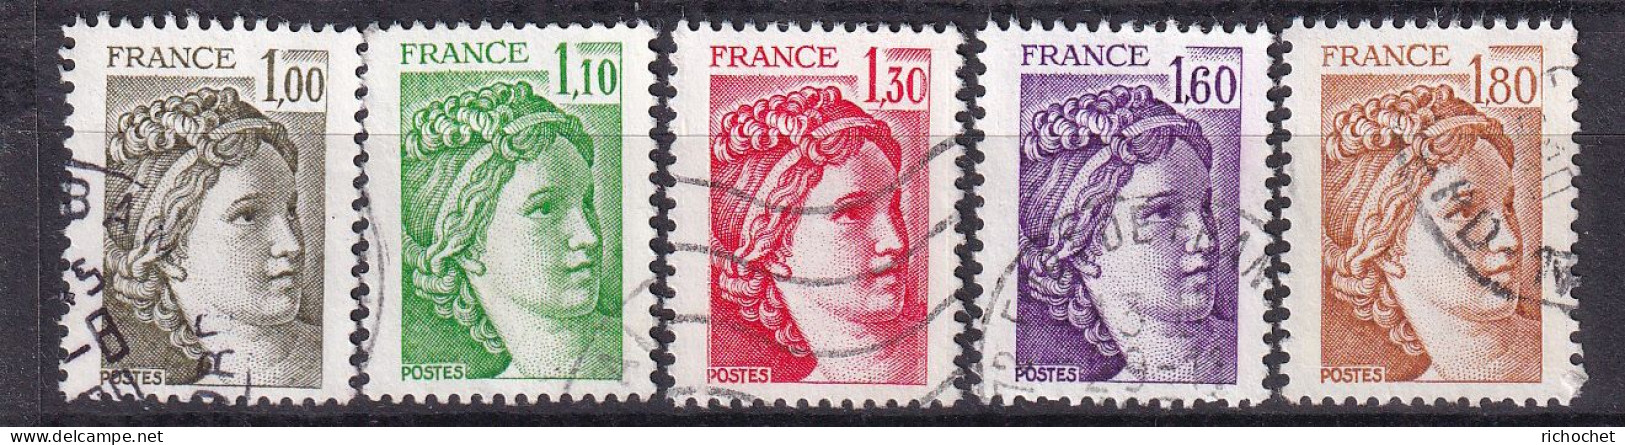 France 2057 à 2061 ° - Used Stamps